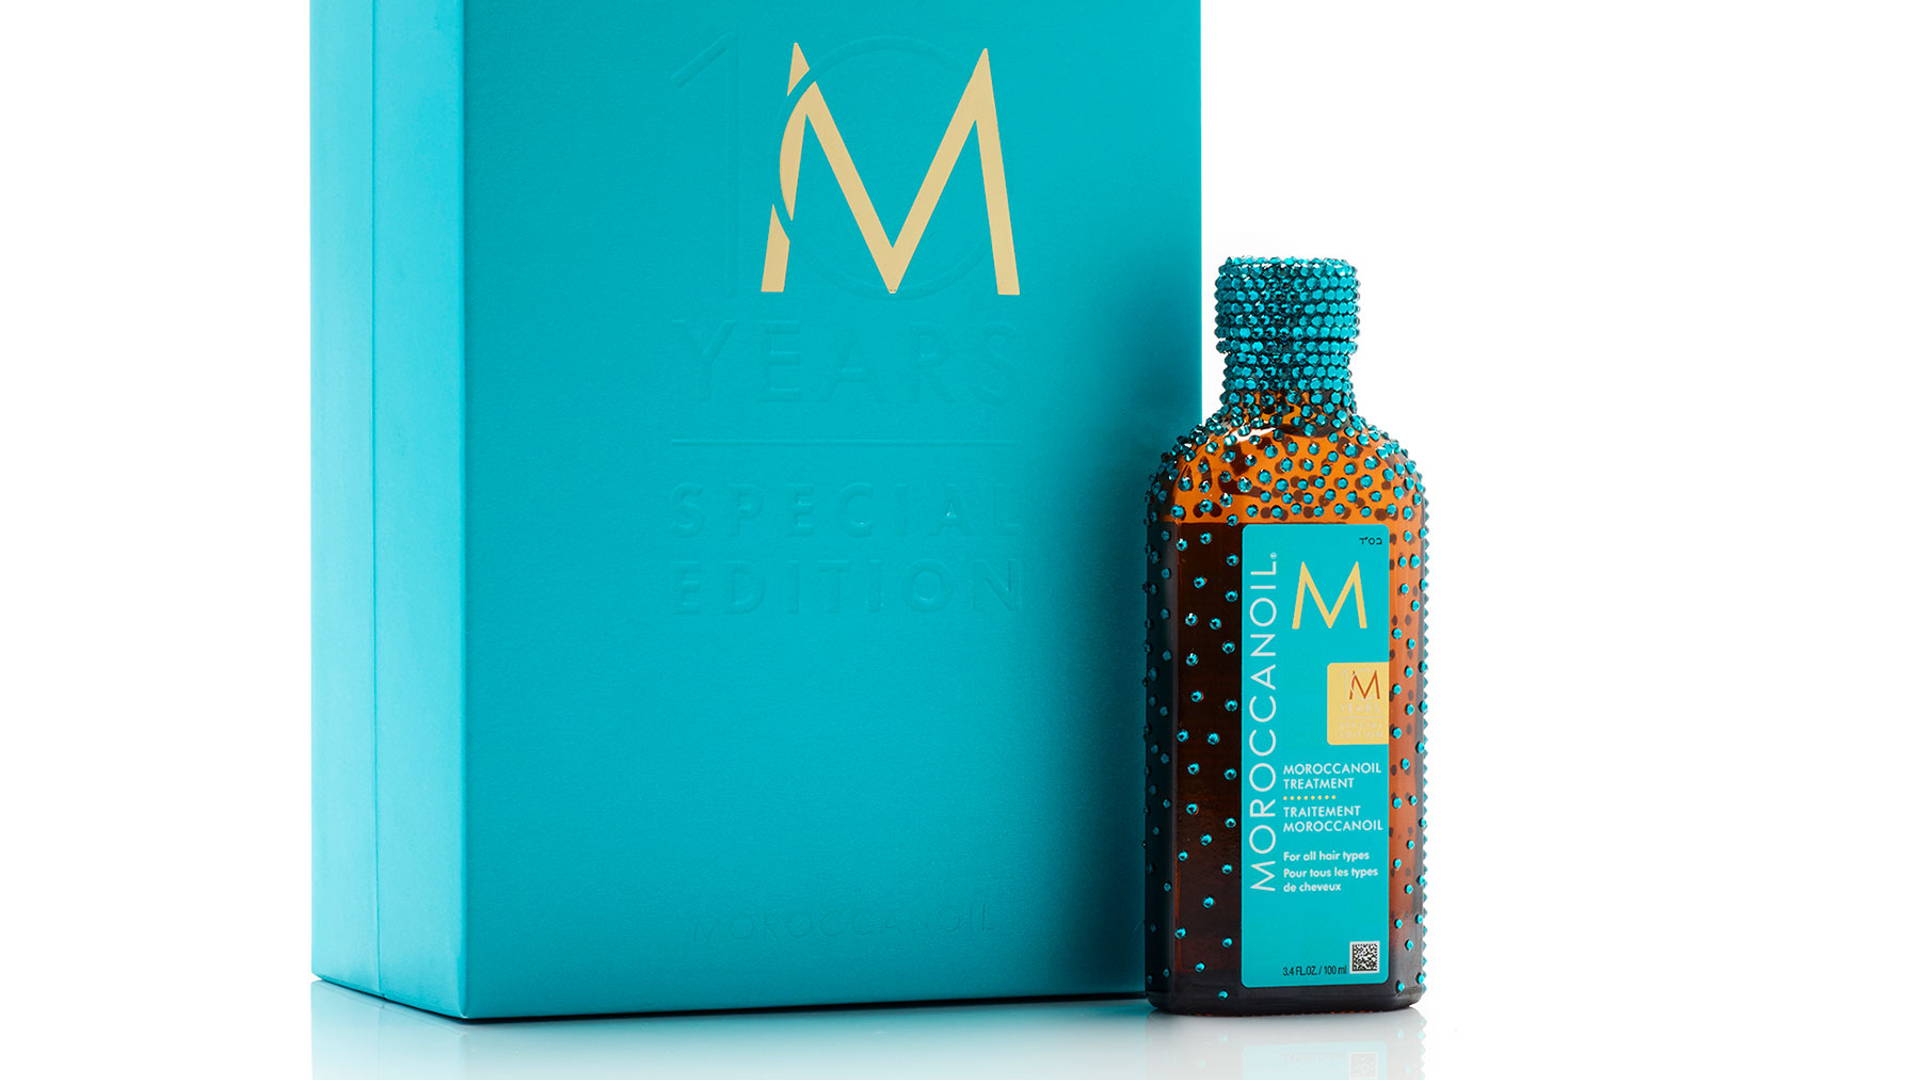 Featured image for Moroccanoil Celebrates 10 Years of Haircare With This Special Edition Packaging